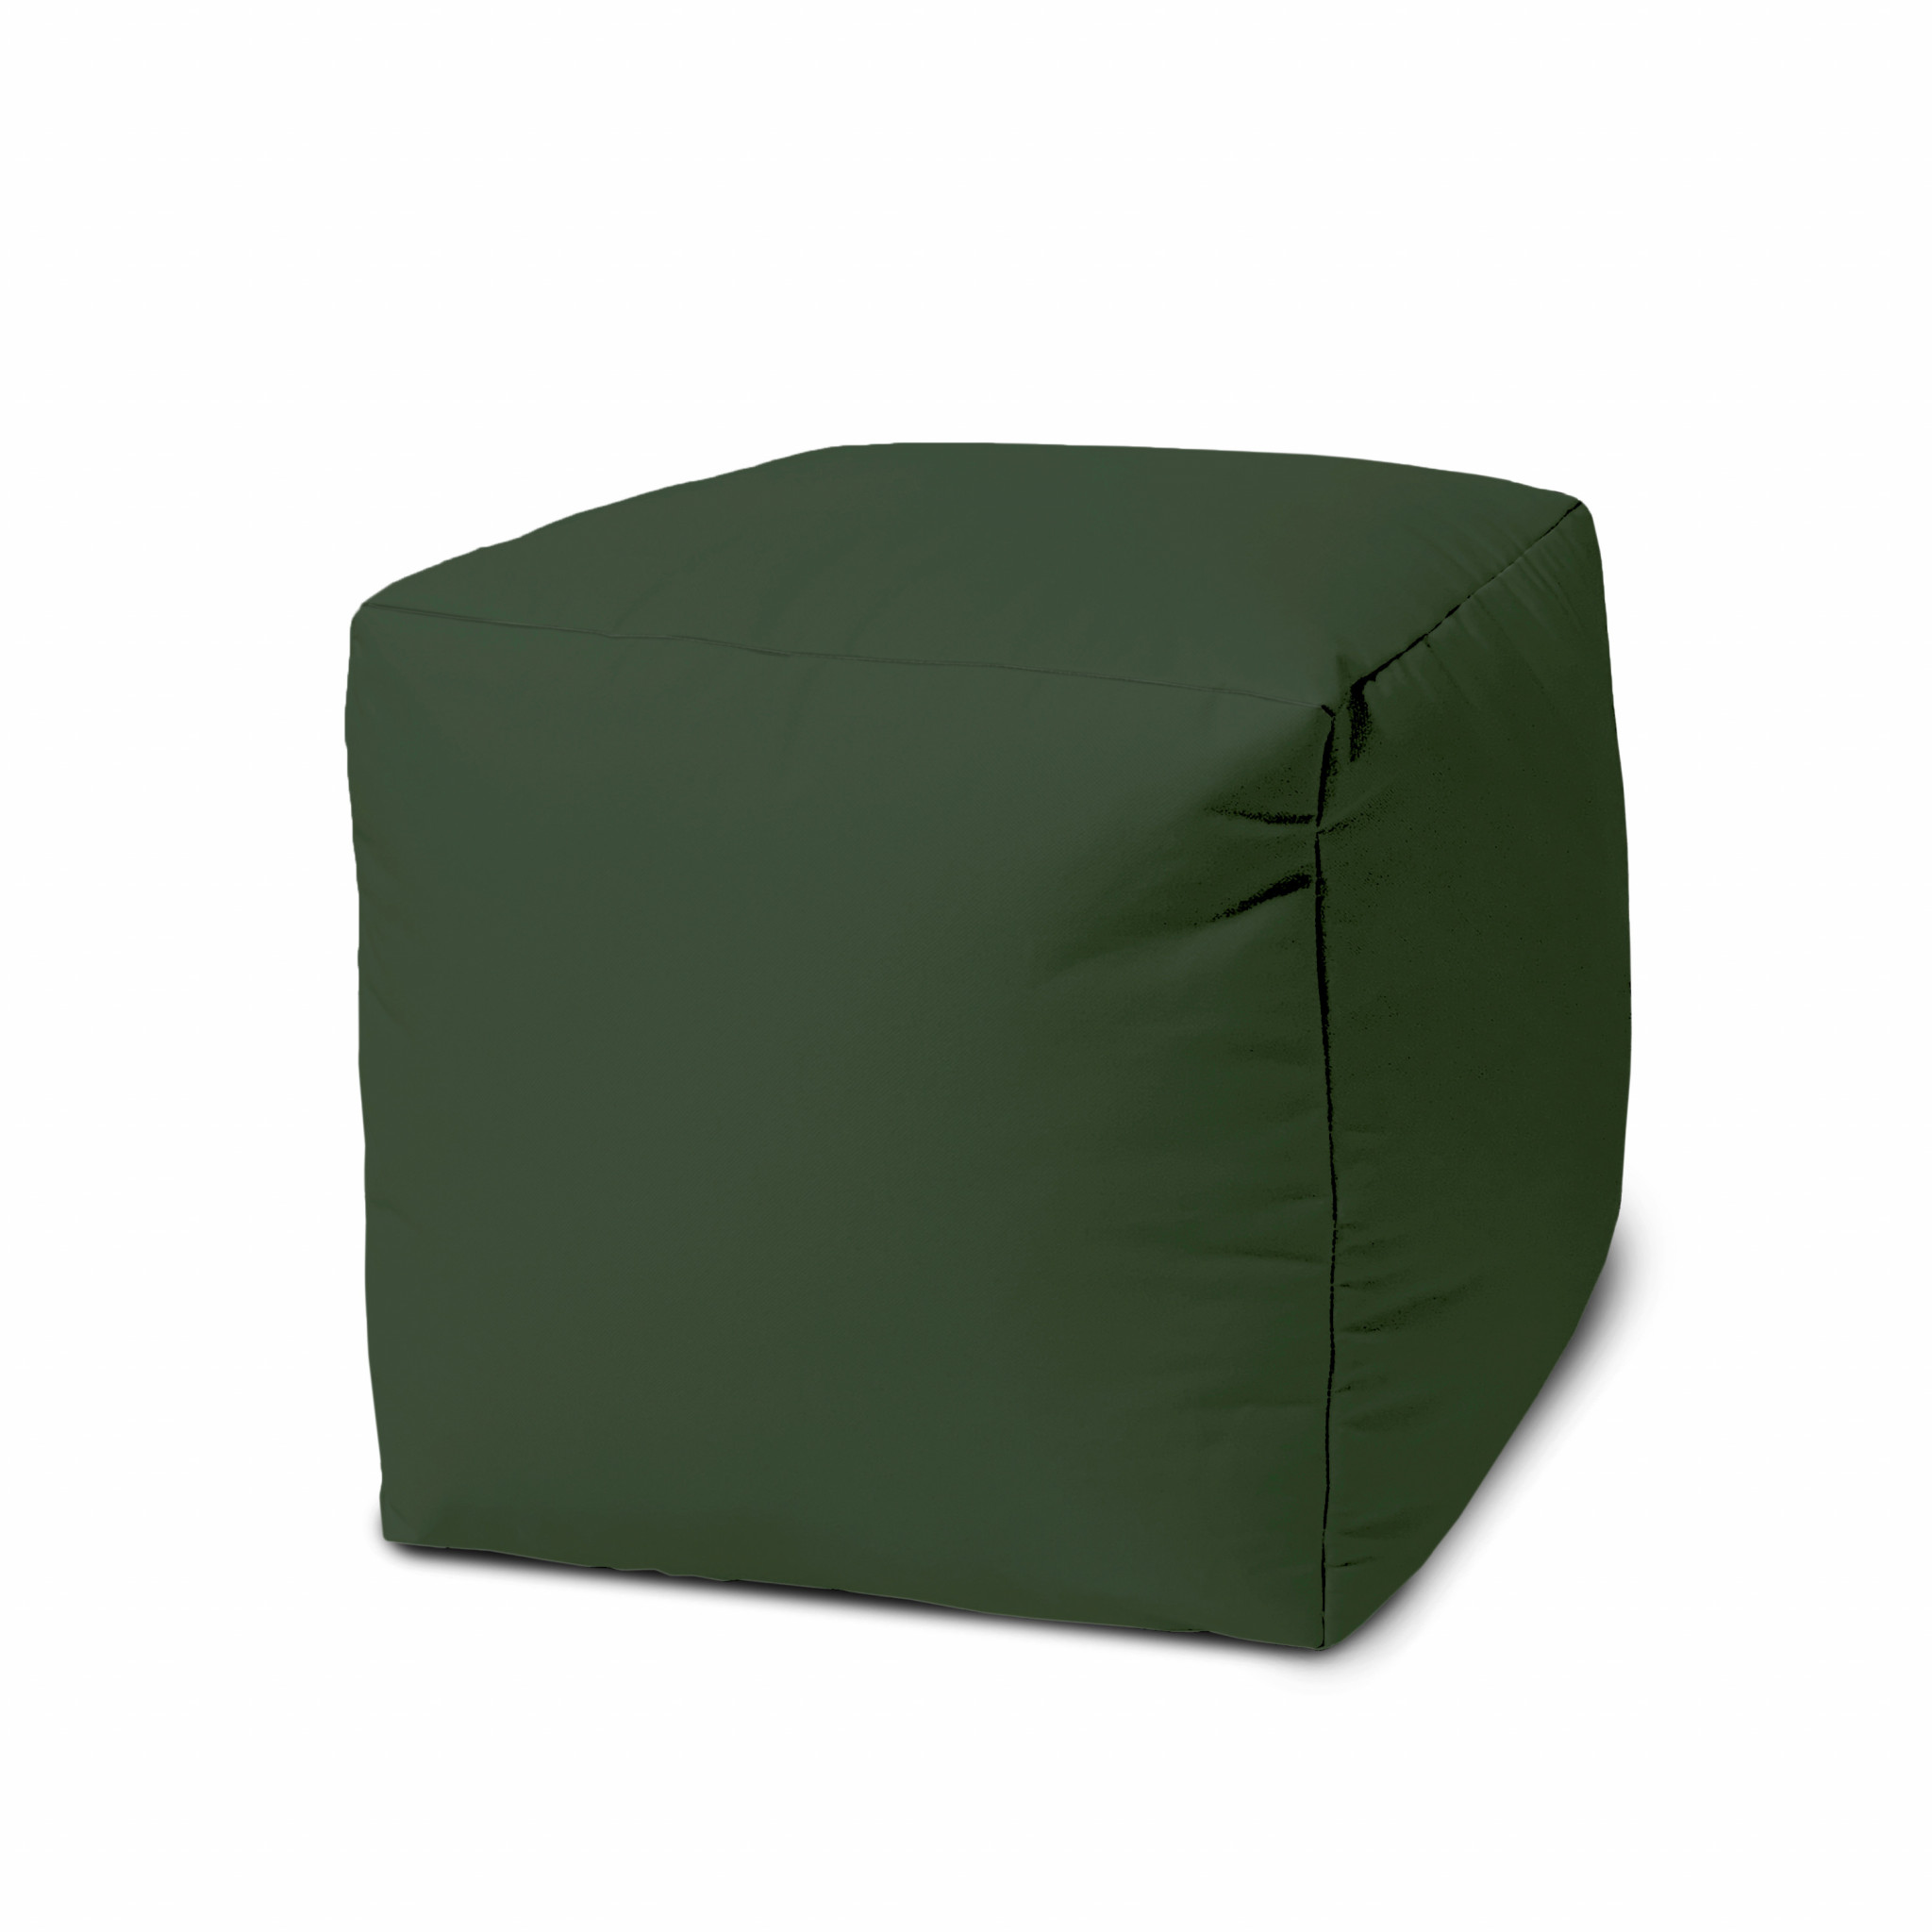 17 Cool Moss Green Solid Color Indoor Outdoor Pouf Ottoman